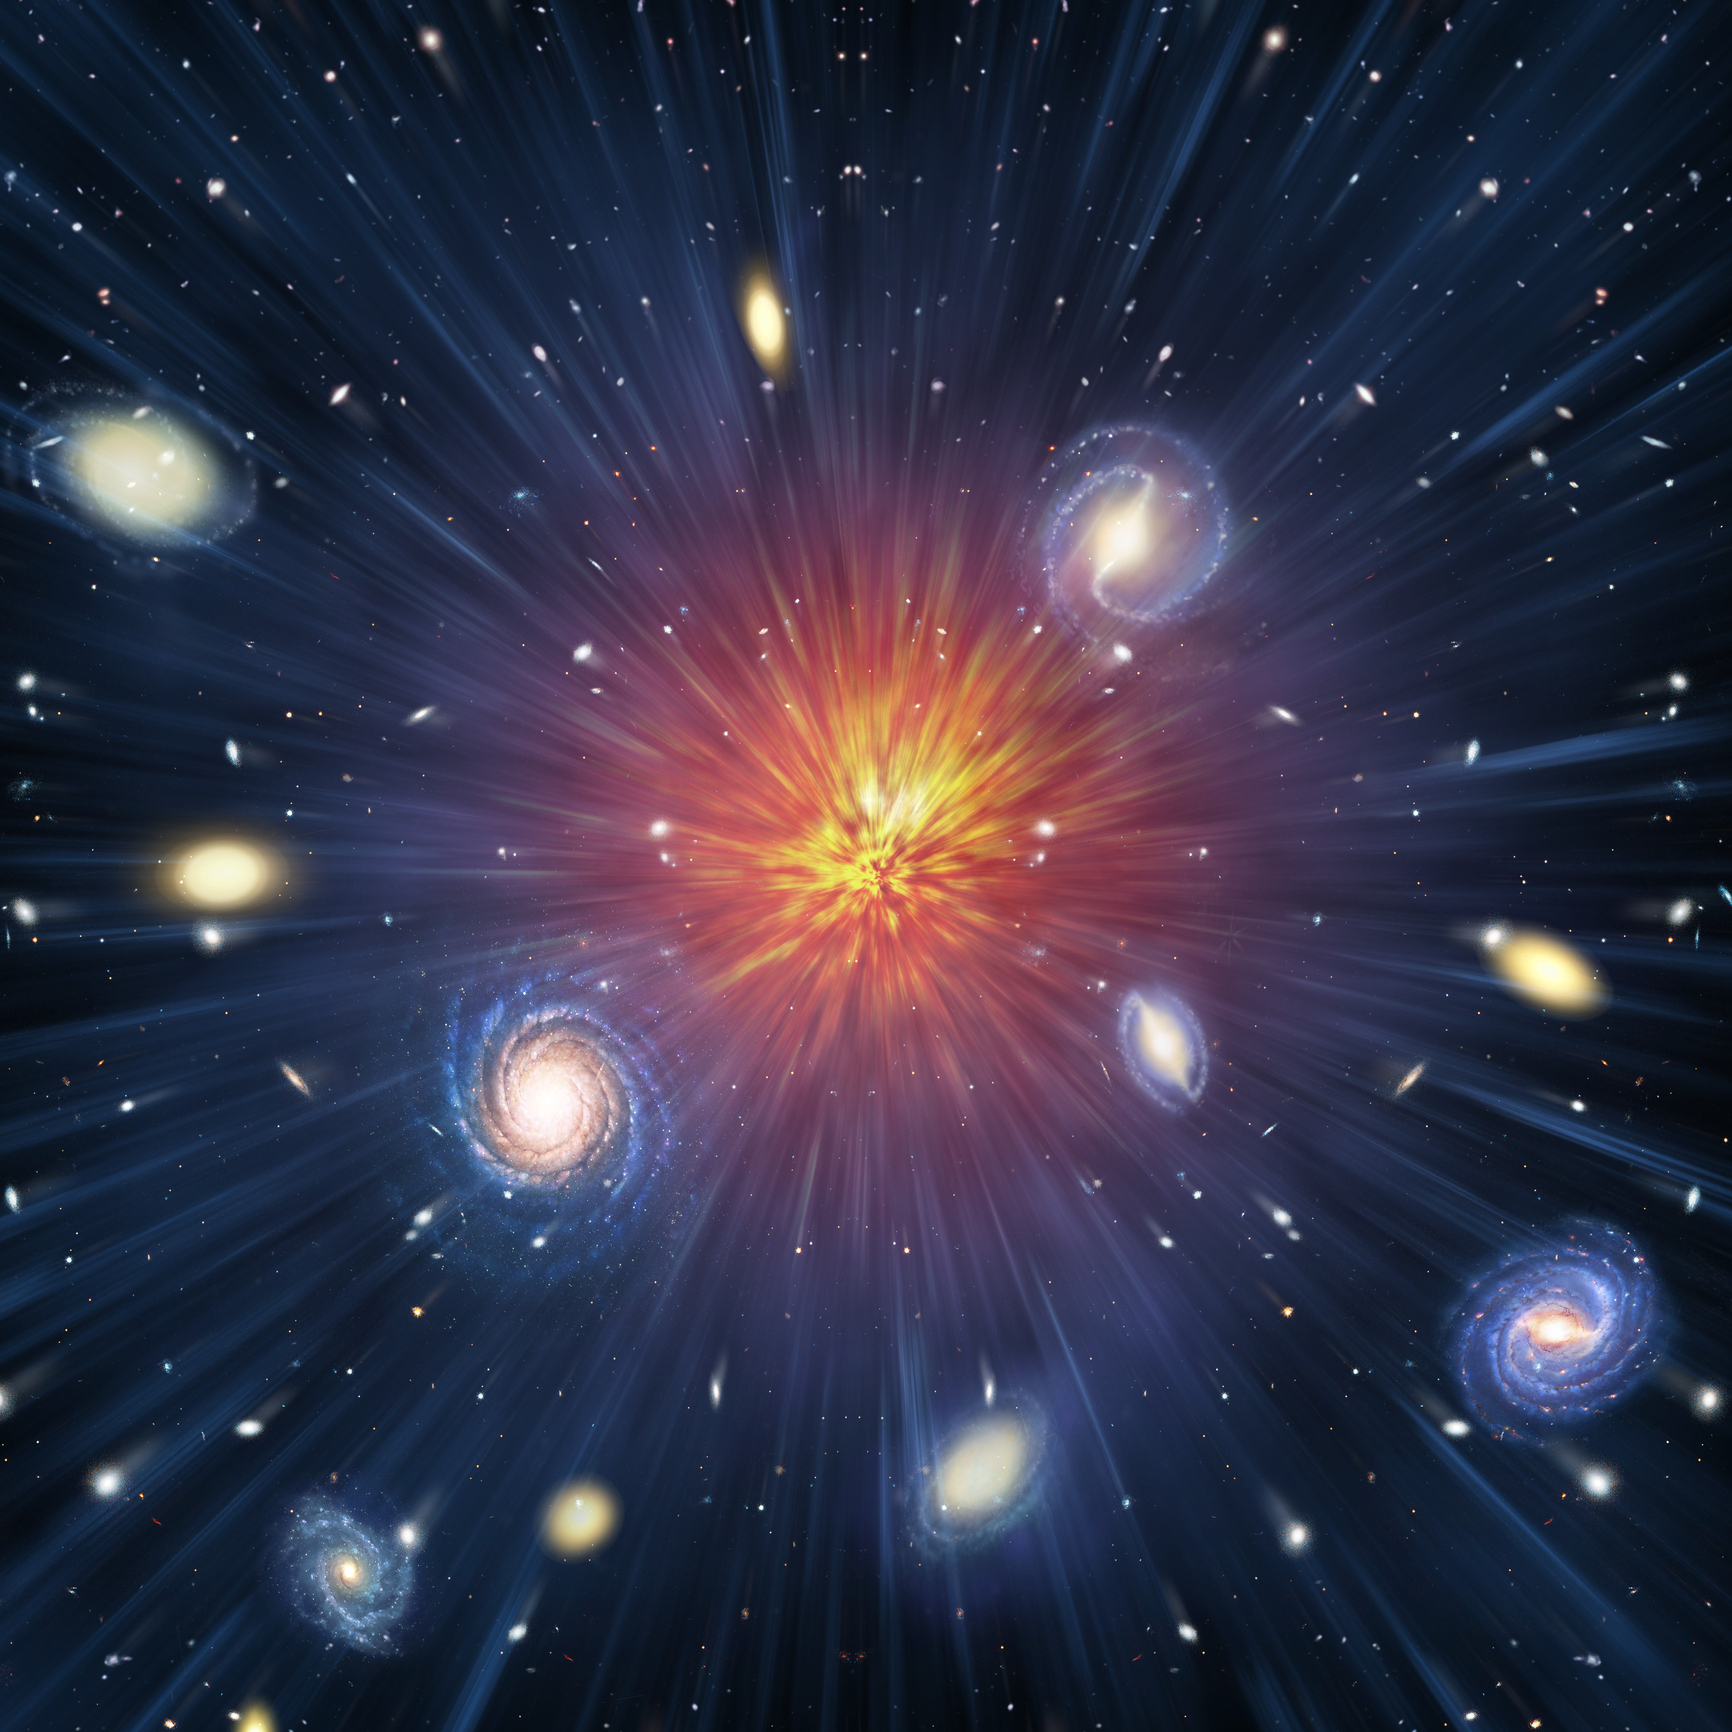 Does the Universe expand faster than light?